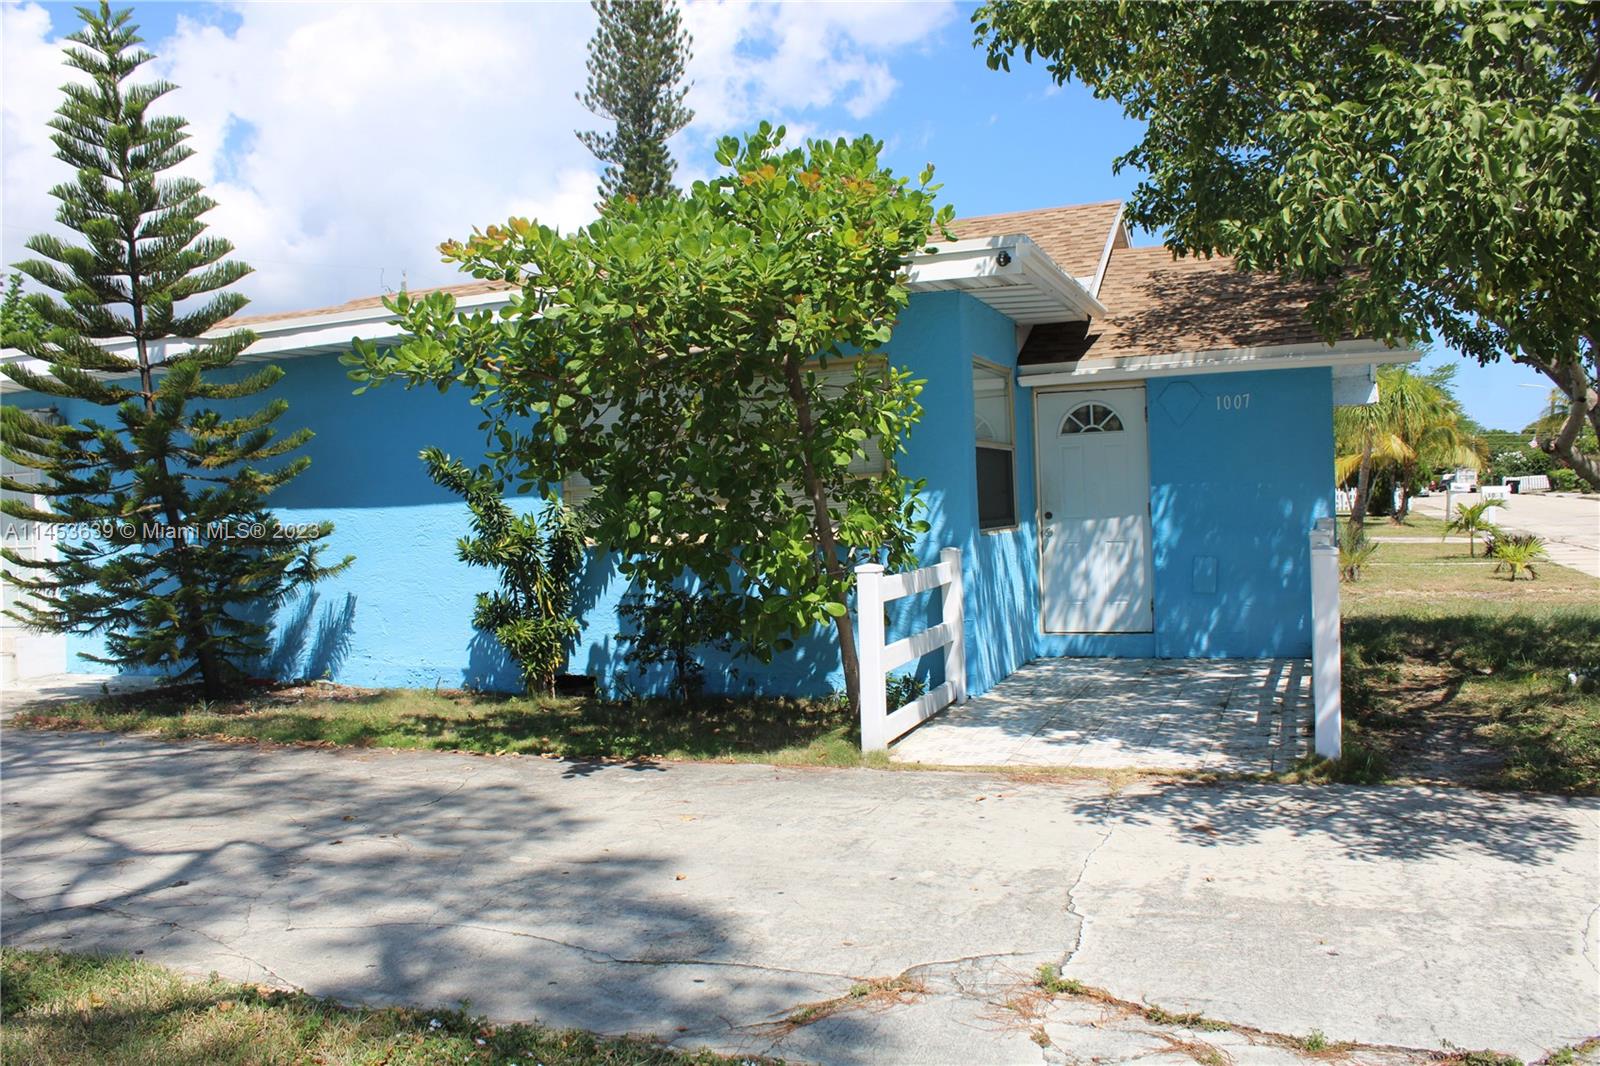 Property for Sale at 1007 N E St St, Lake Worth, Palm Beach County, Florida - Bedrooms: 3 
Bathrooms: 2  - $475,000